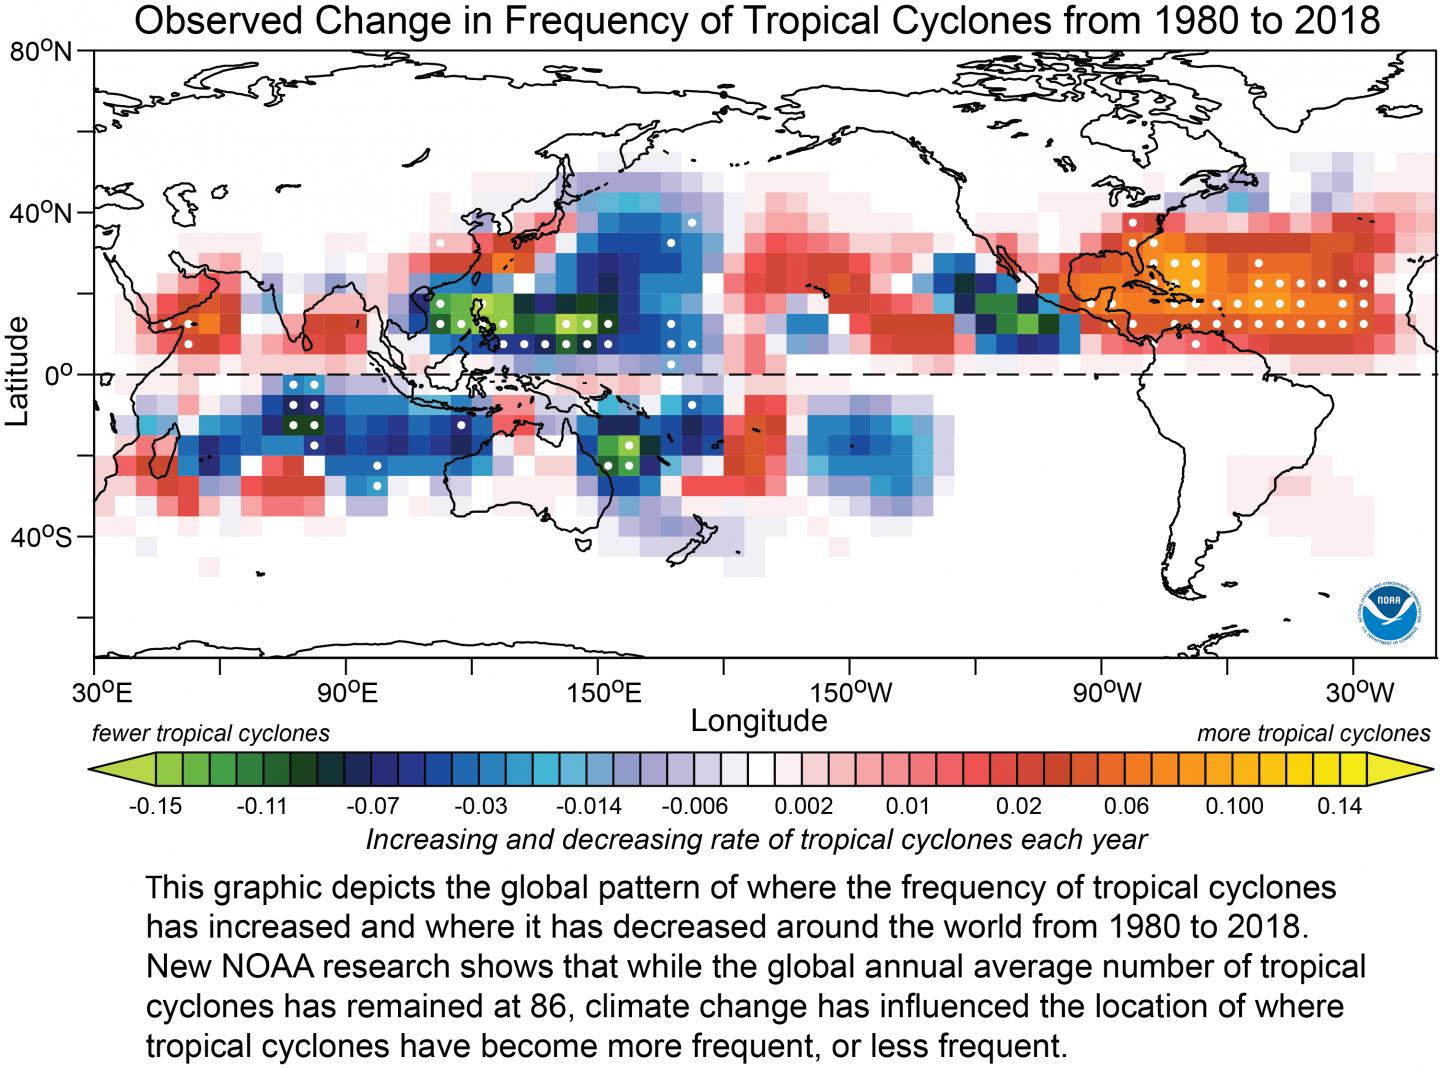 Climate Change Influence on Tropical Cyclones